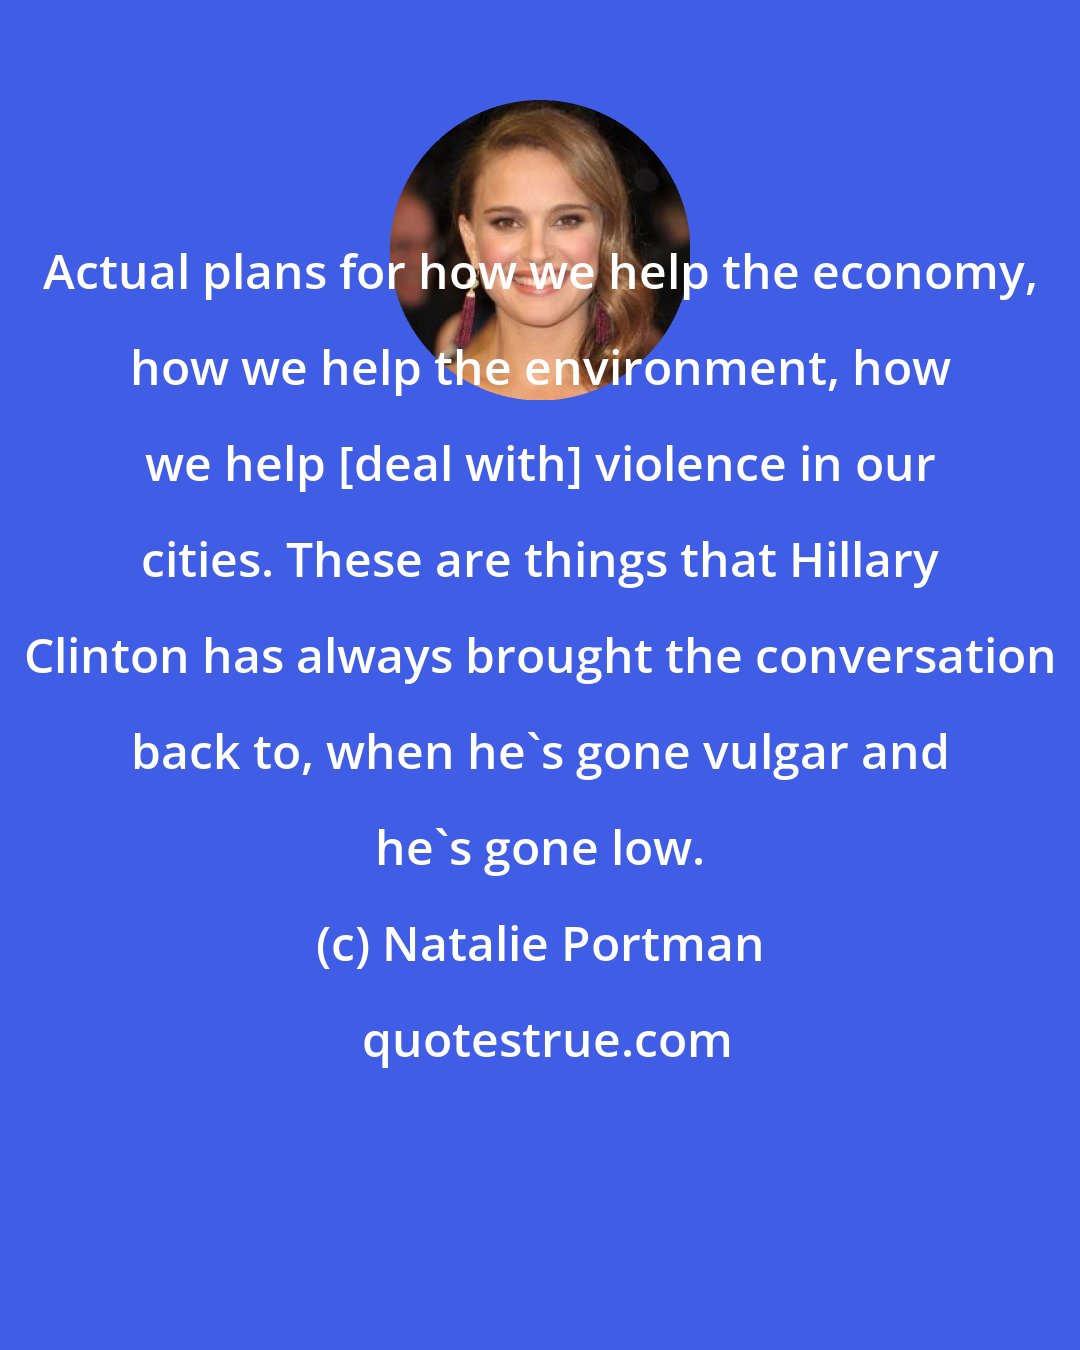 Natalie Portman: Actual plans for how we help the economy, how we help the environment, how we help [deal with] violence in our cities. These are things that Hillary Clinton has always brought the conversation back to, when he's gone vulgar and he's gone low.